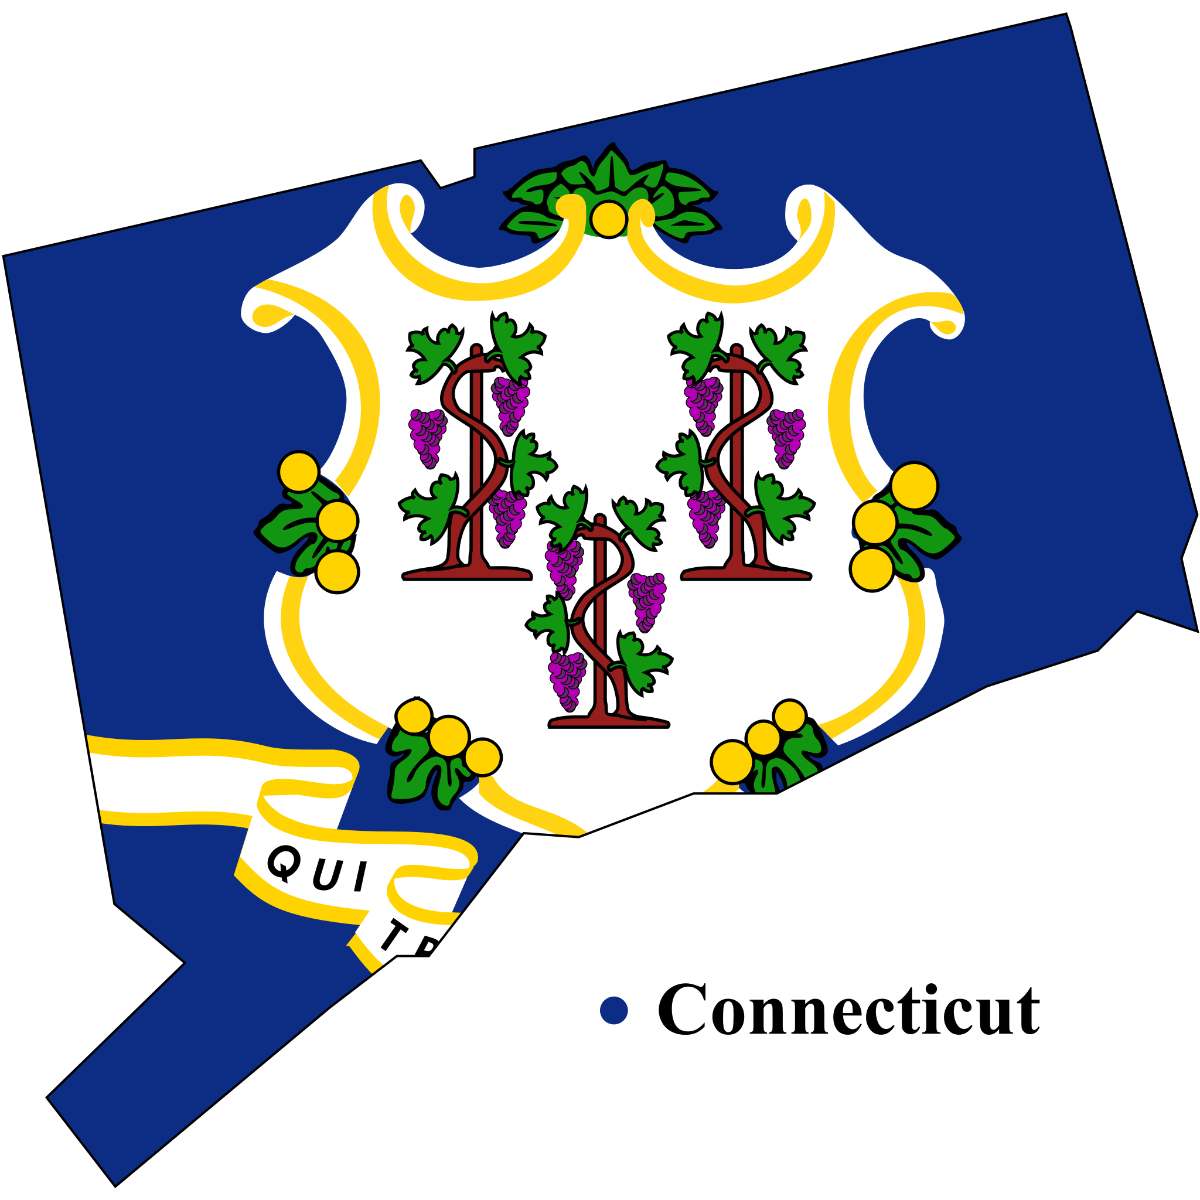 Connecticut State map cutout with Connecticut flag superimposed